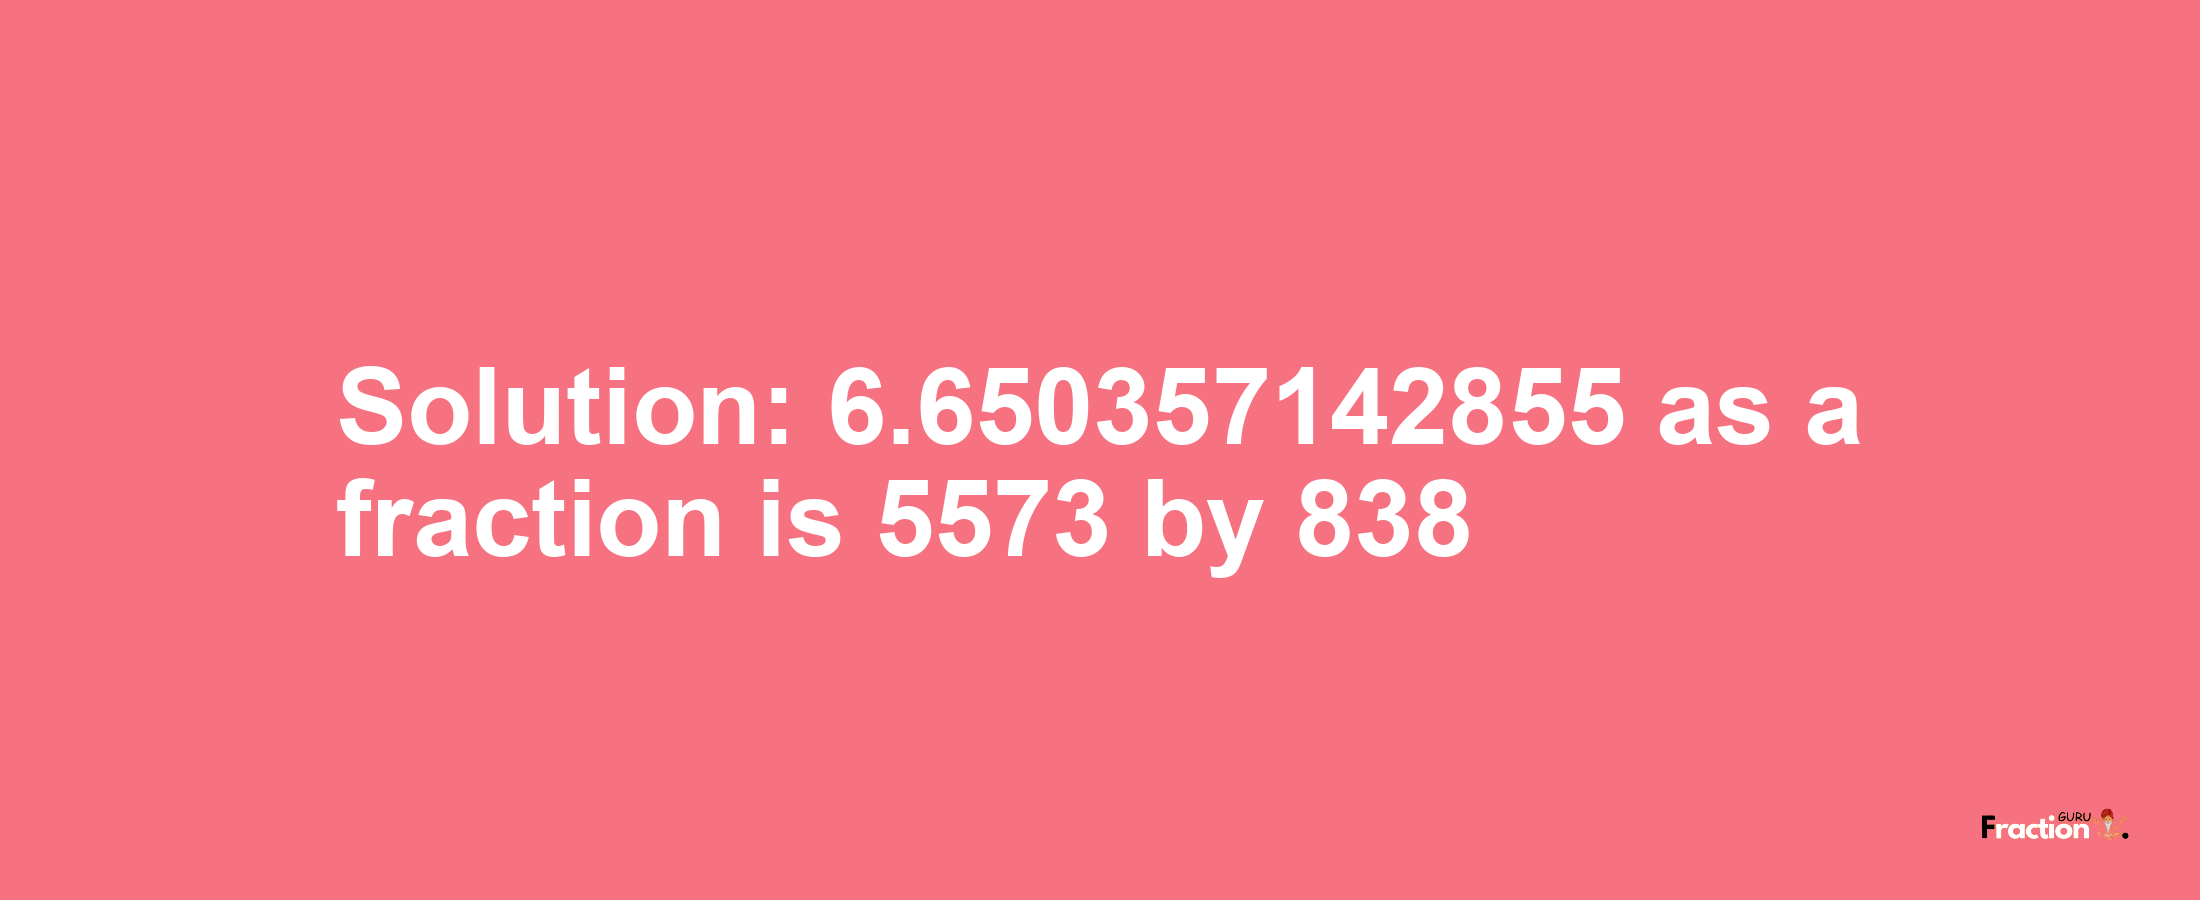 Solution:6.650357142855 as a fraction is 5573/838